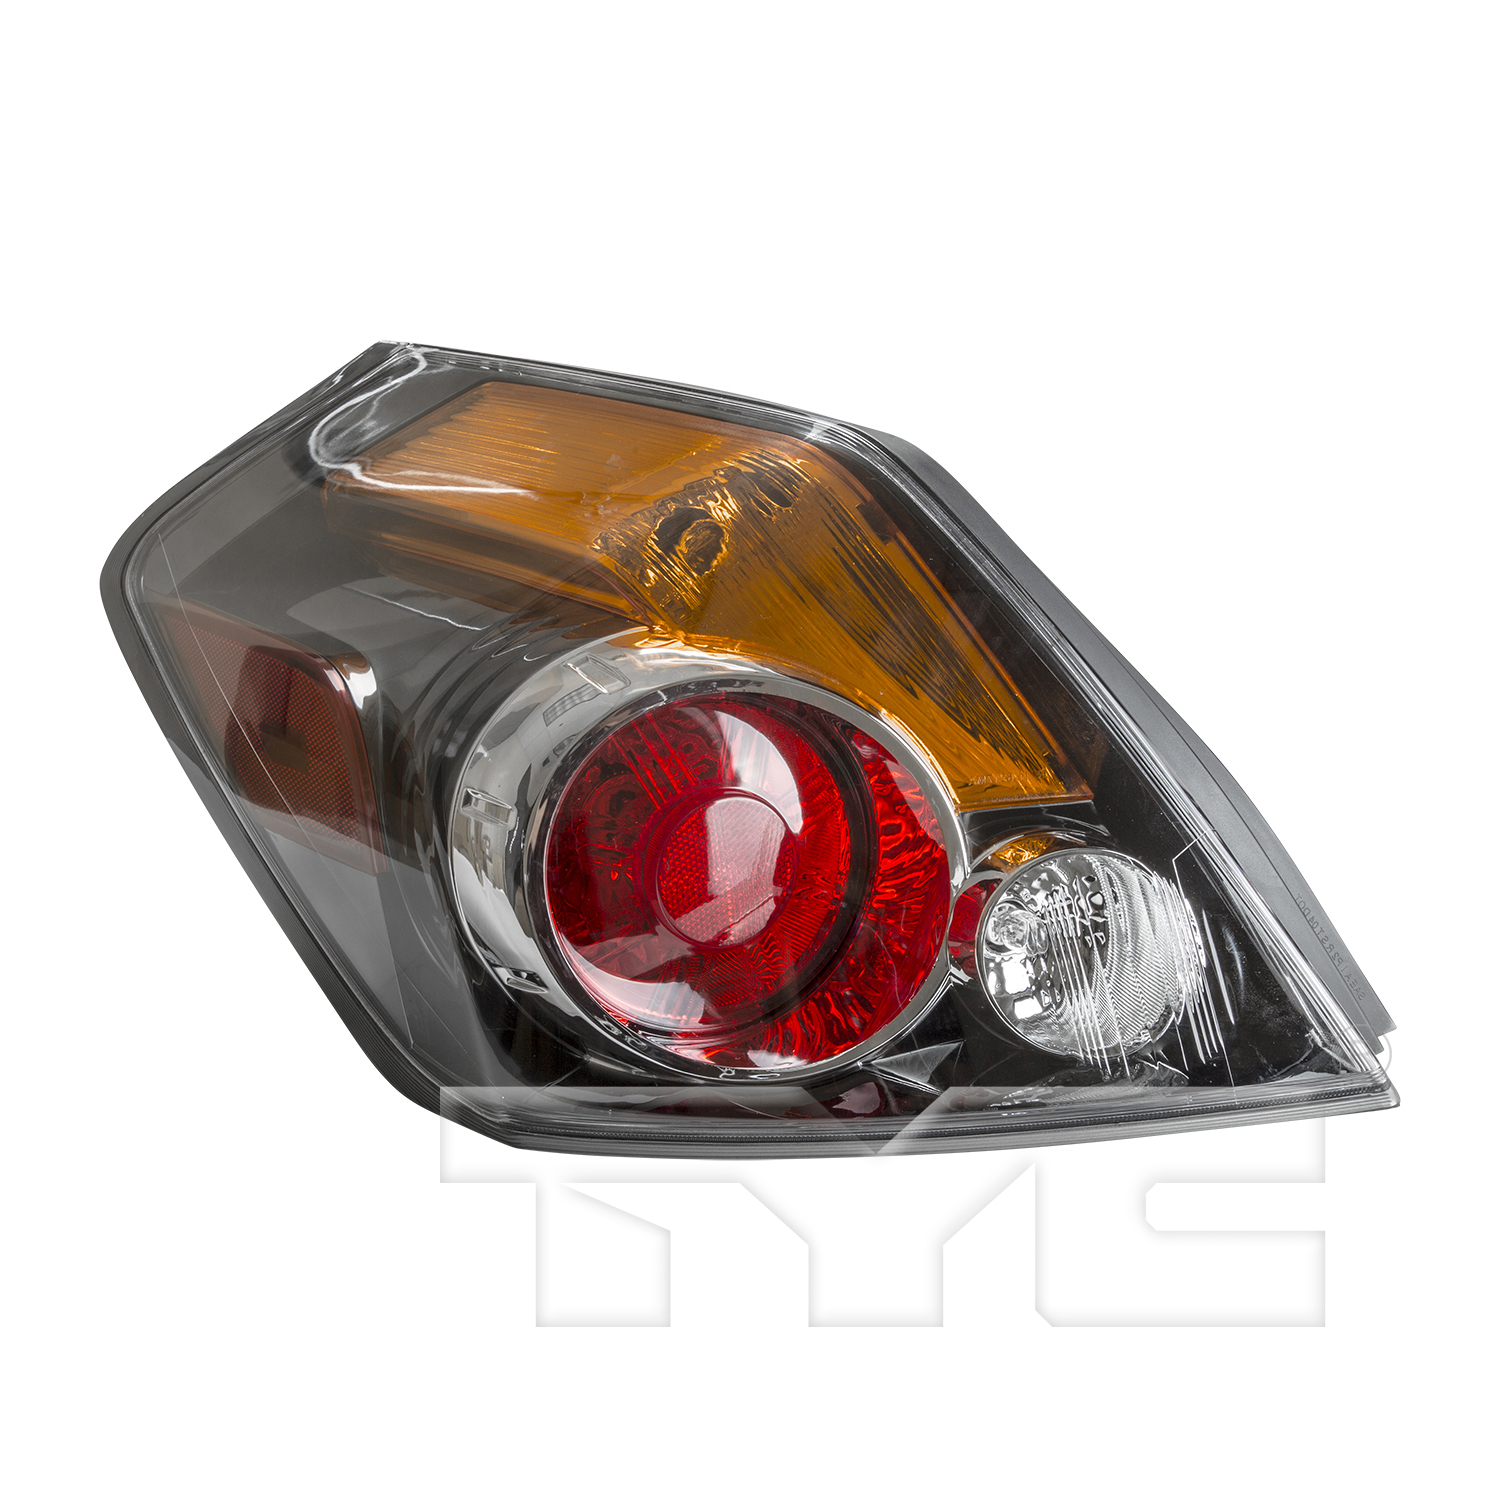 Aftermarket TAILLIGHTS for NISSAN - ALTIMA, ALTIMA,07-09,LT Taillamp assy